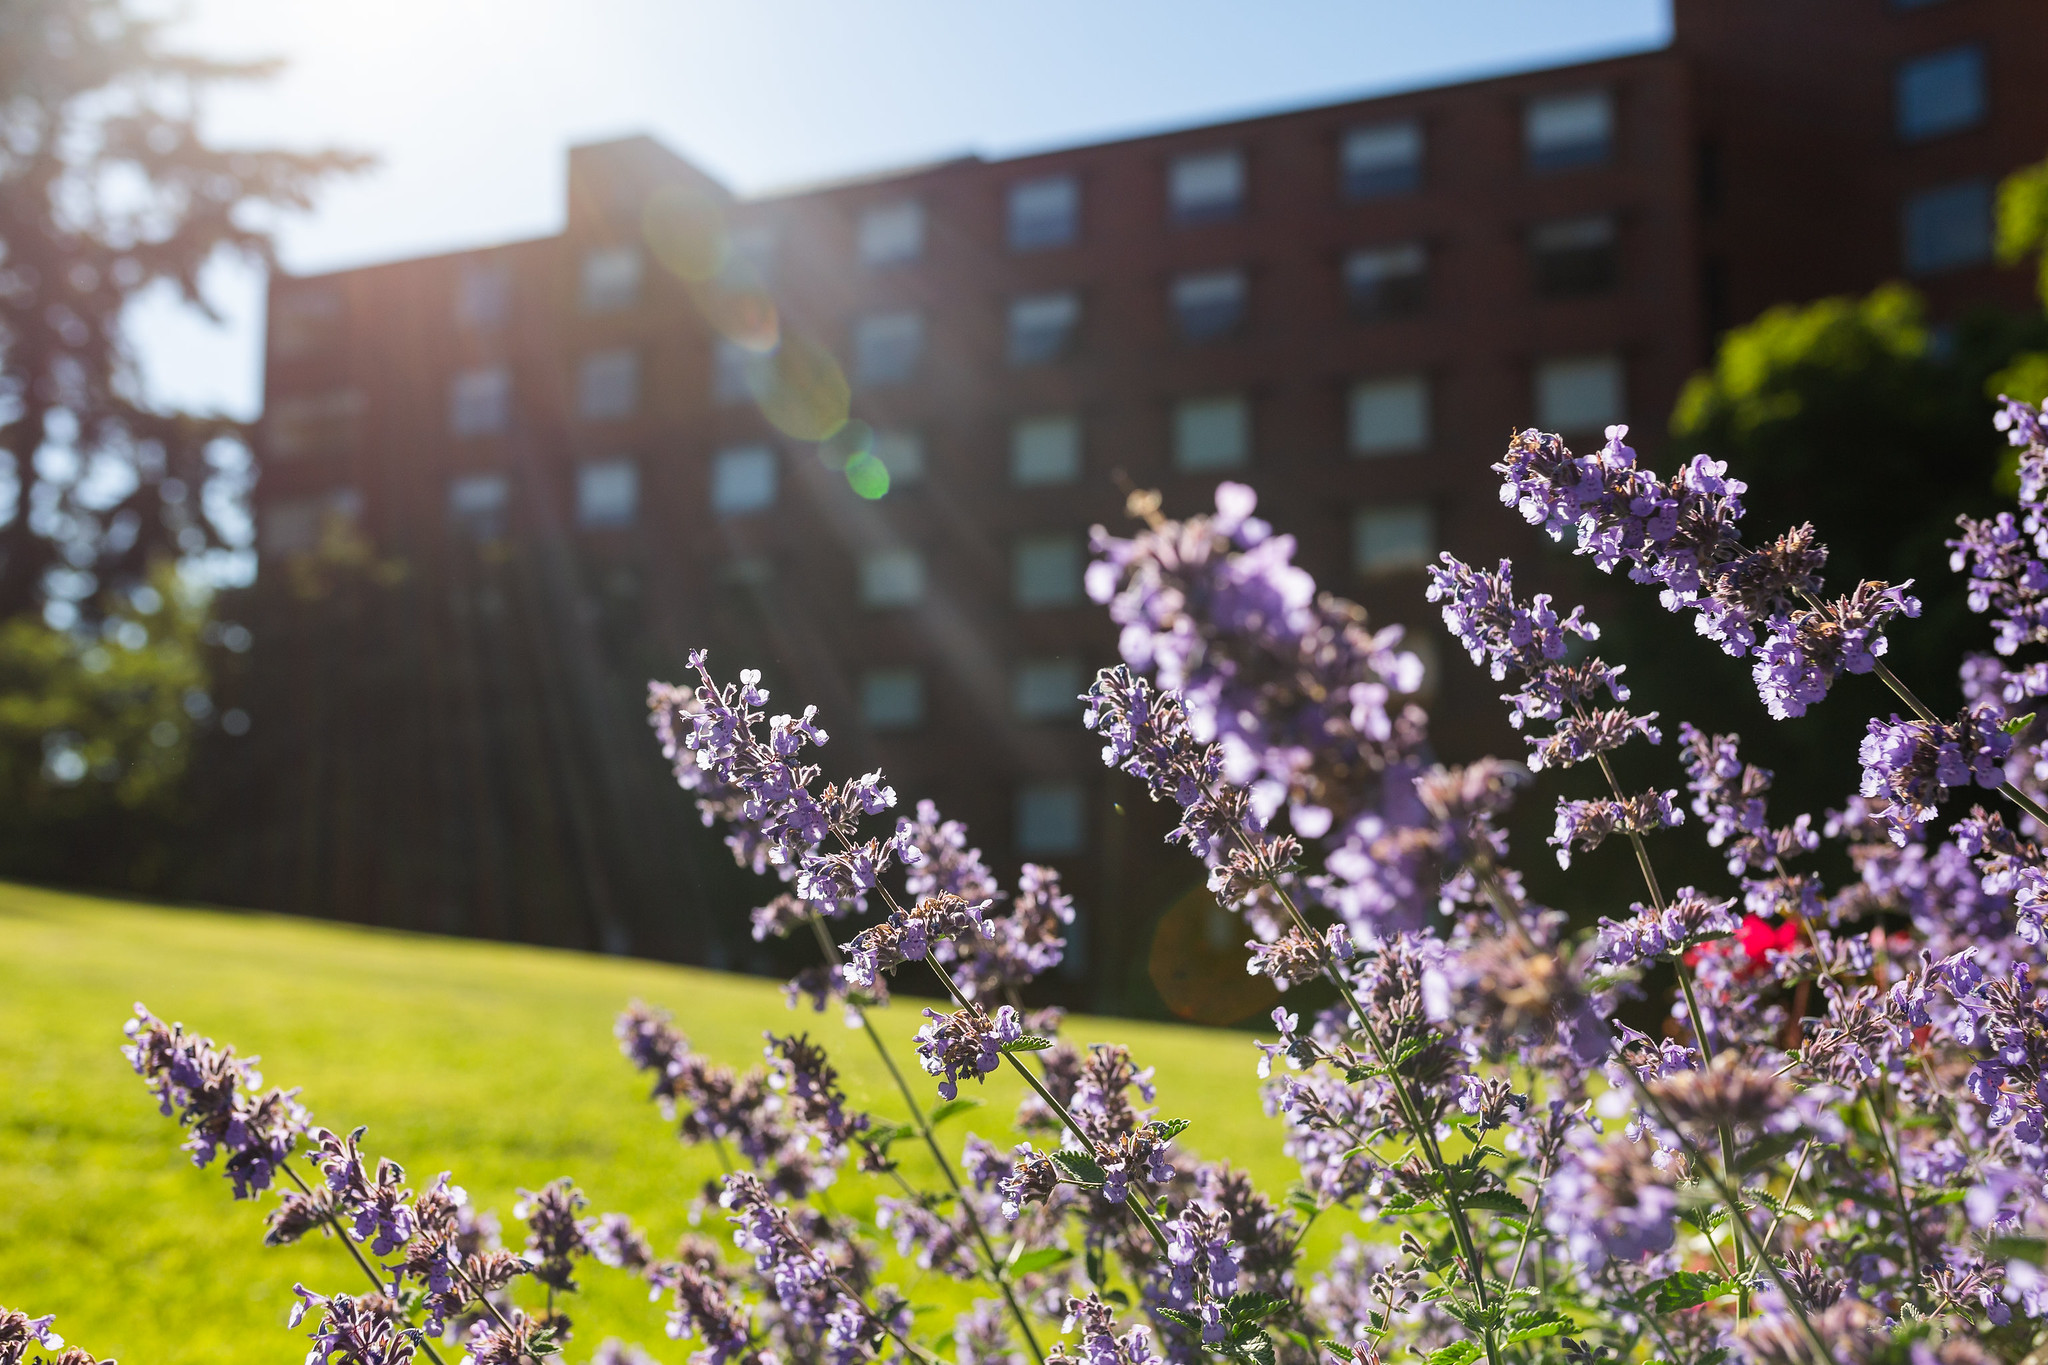 Flowers blooming outside Mathes Hall on a sunny day